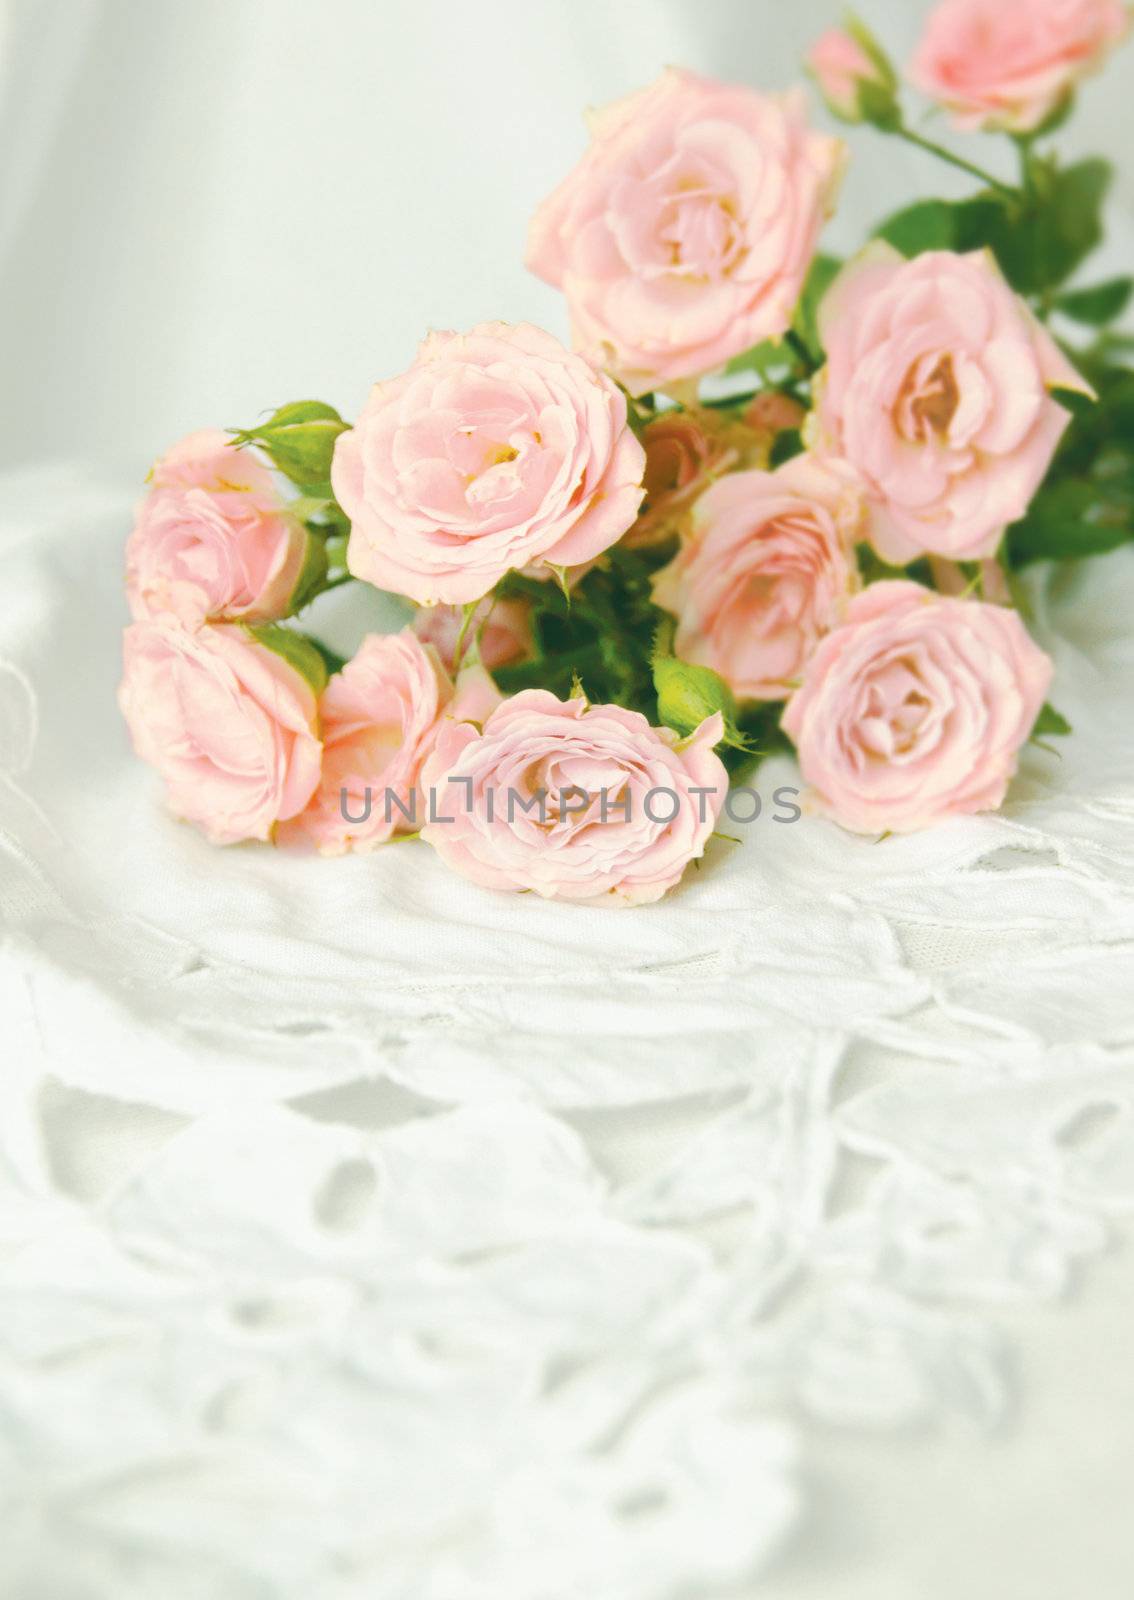 beautiful roses on a white background by lana_art